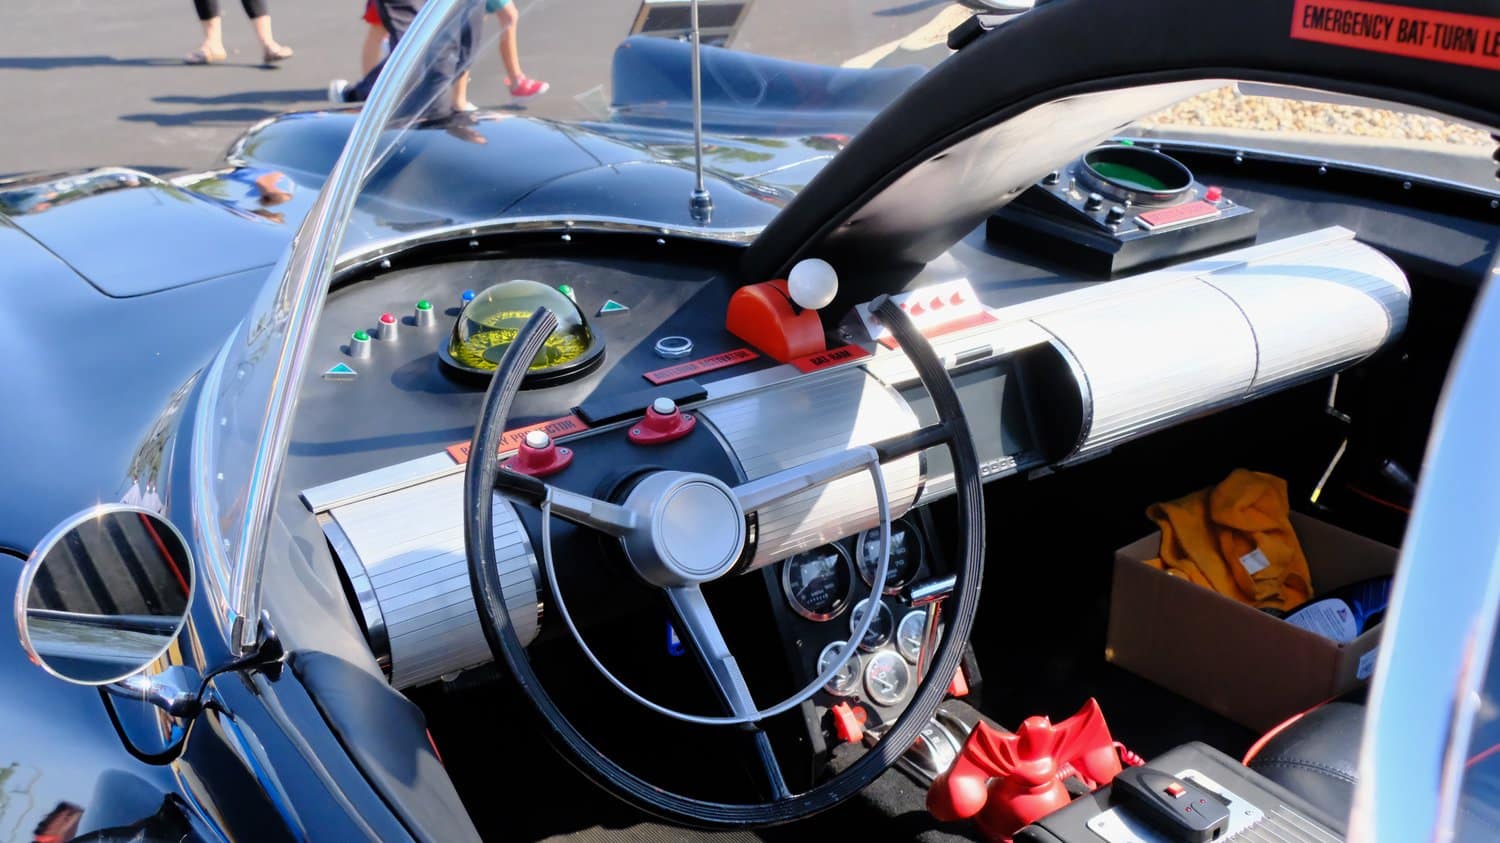 Interior buttons and controls of a replica, vintage Batmobile.